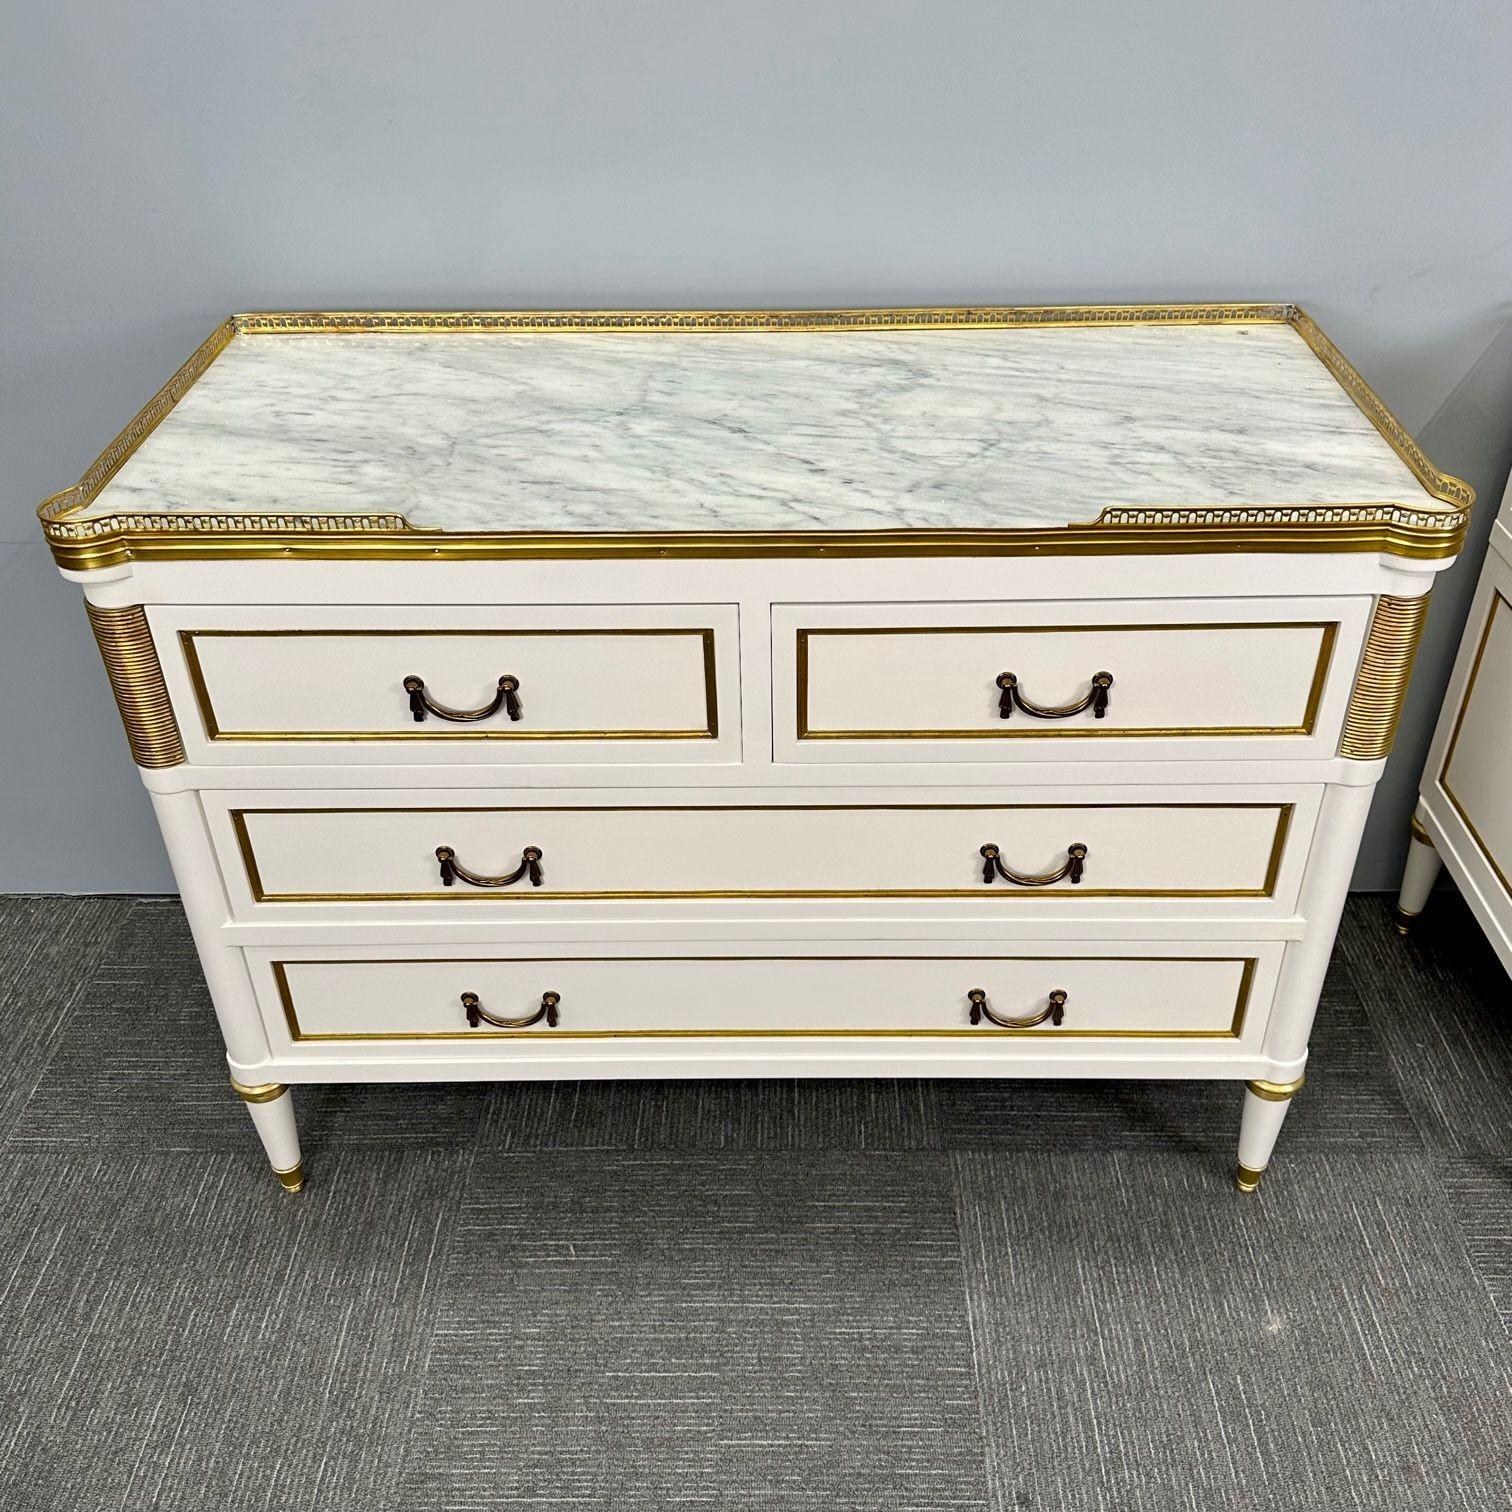 Louis XVI Hollywood Regency Maison Jansen Style White Commodes / Nightstands In Good Condition For Sale In Stamford, CT